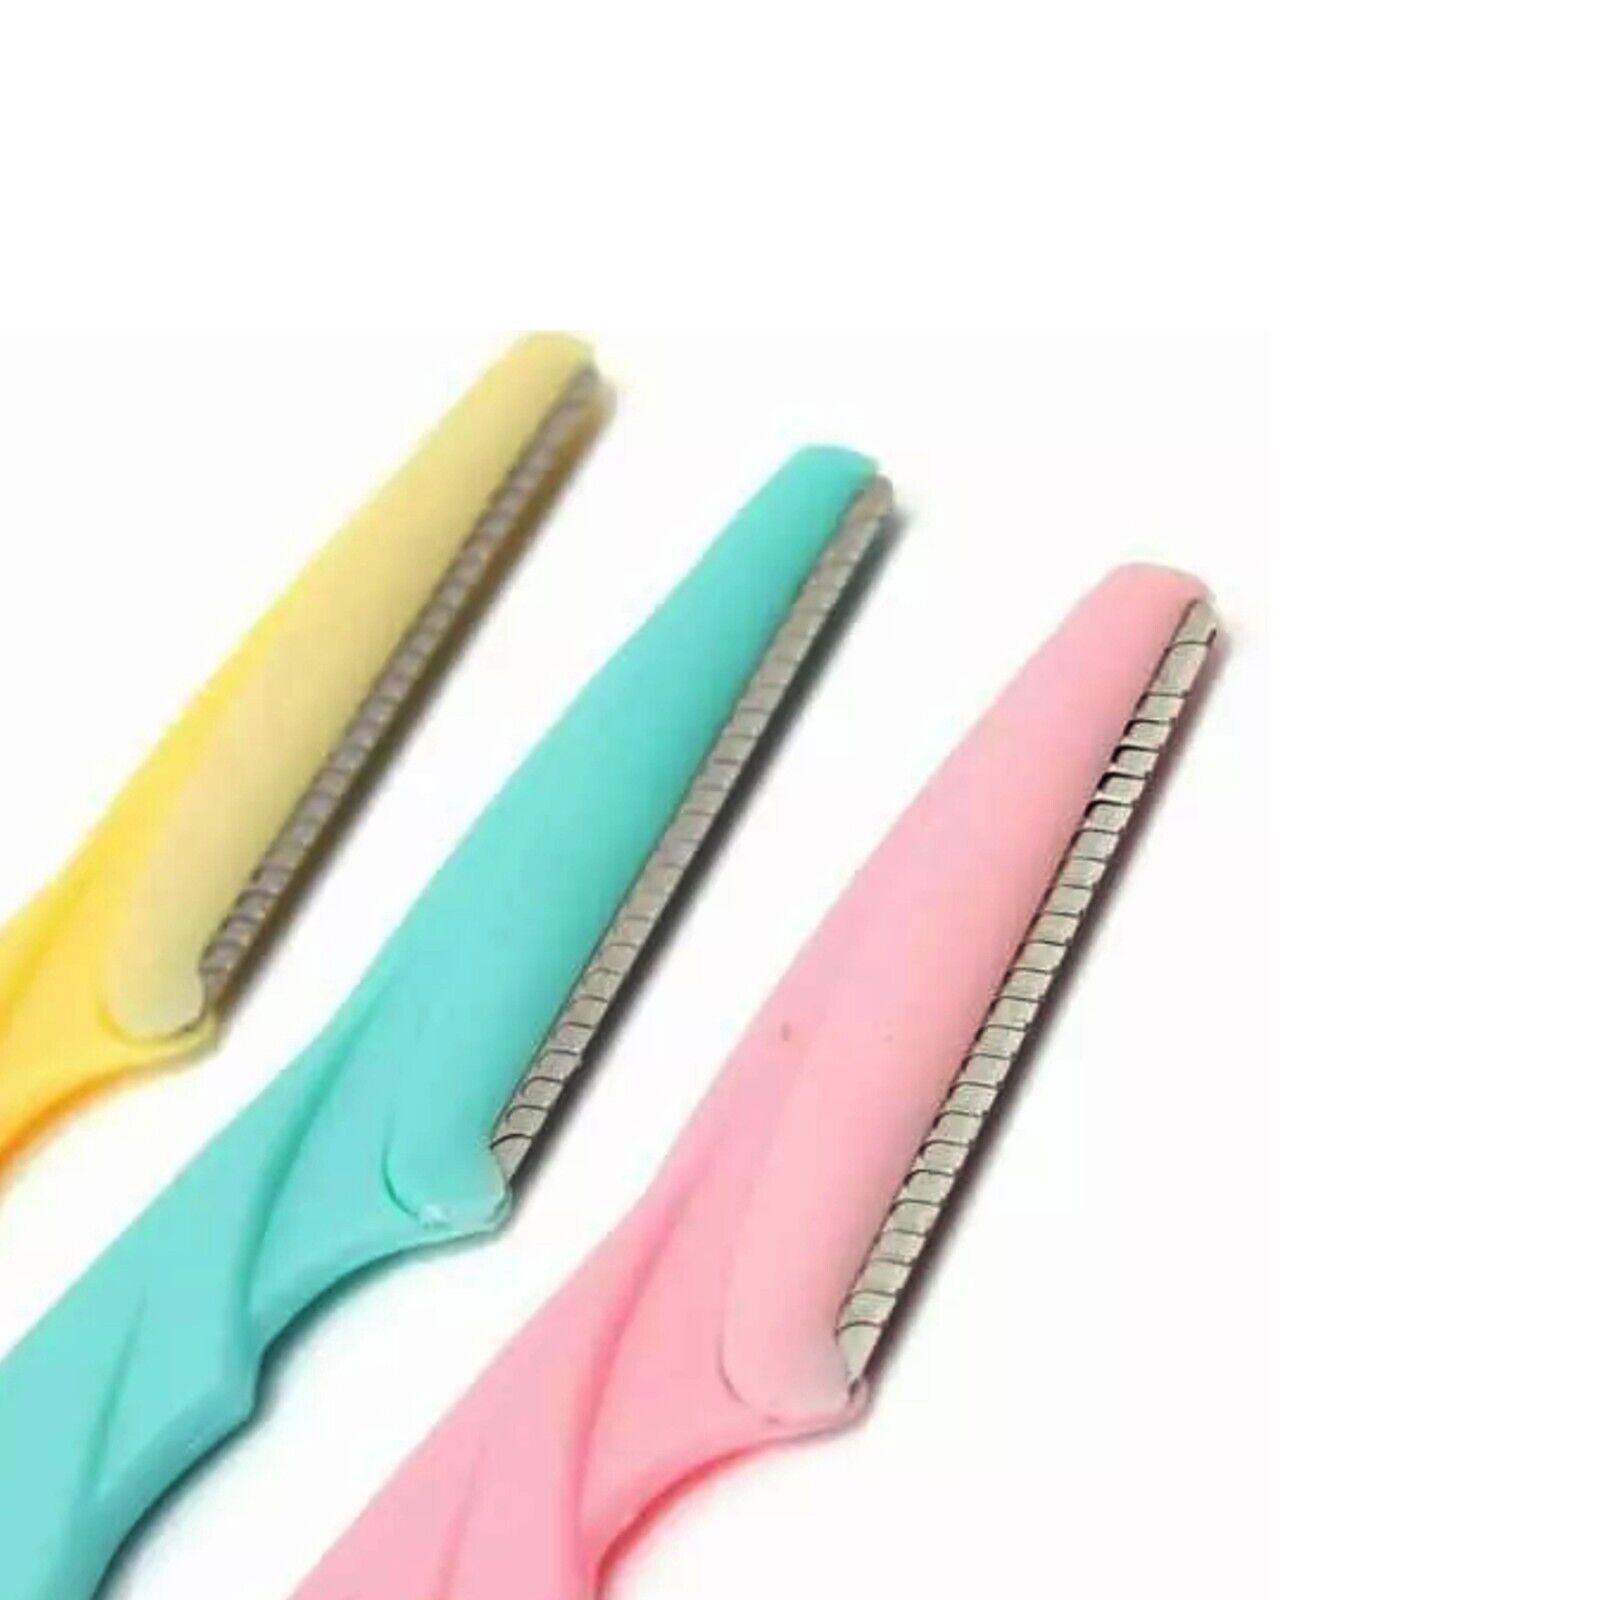 6-in-1 Facial Hair Removal Tool for Women